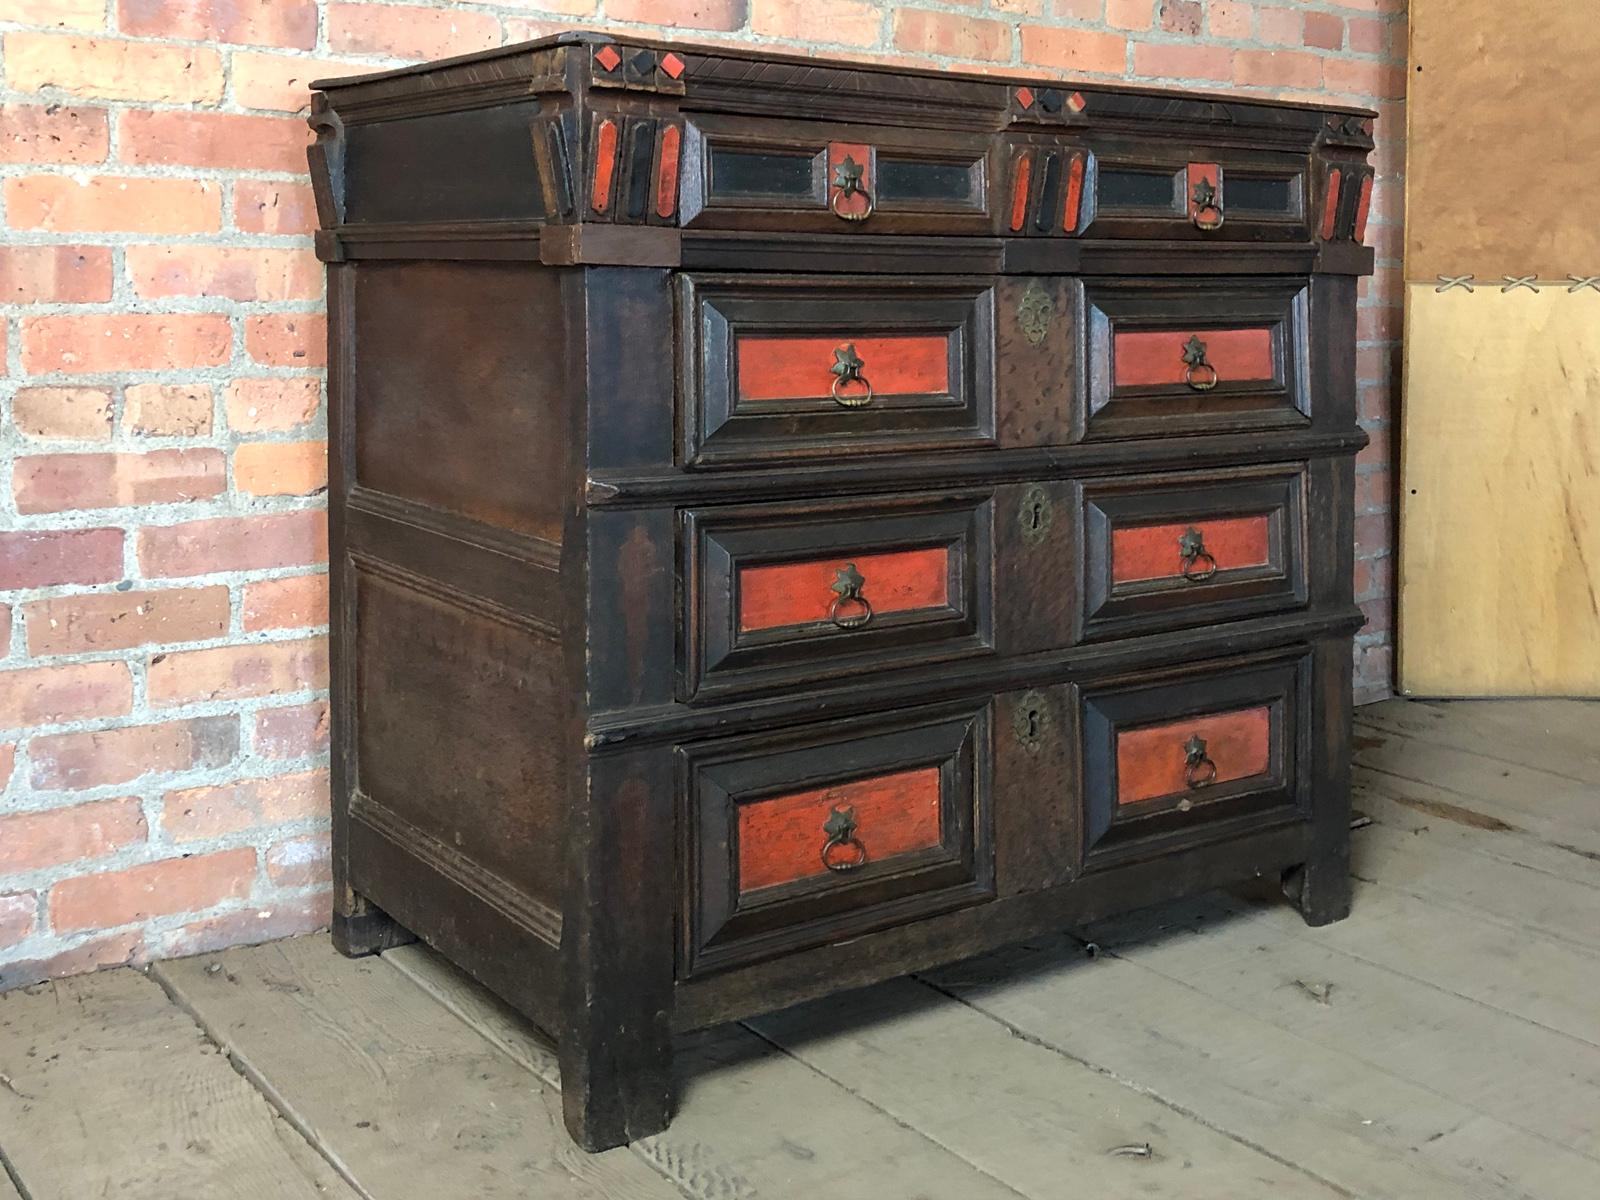 English Charles II Oak and partly stained 17th Century Commode
Made ca. 1670 likely in Dorset, the thin two-board top over four drawers, the drawer fronts accentuated by red and black stain enhancing the design, the top drawer also adorned with